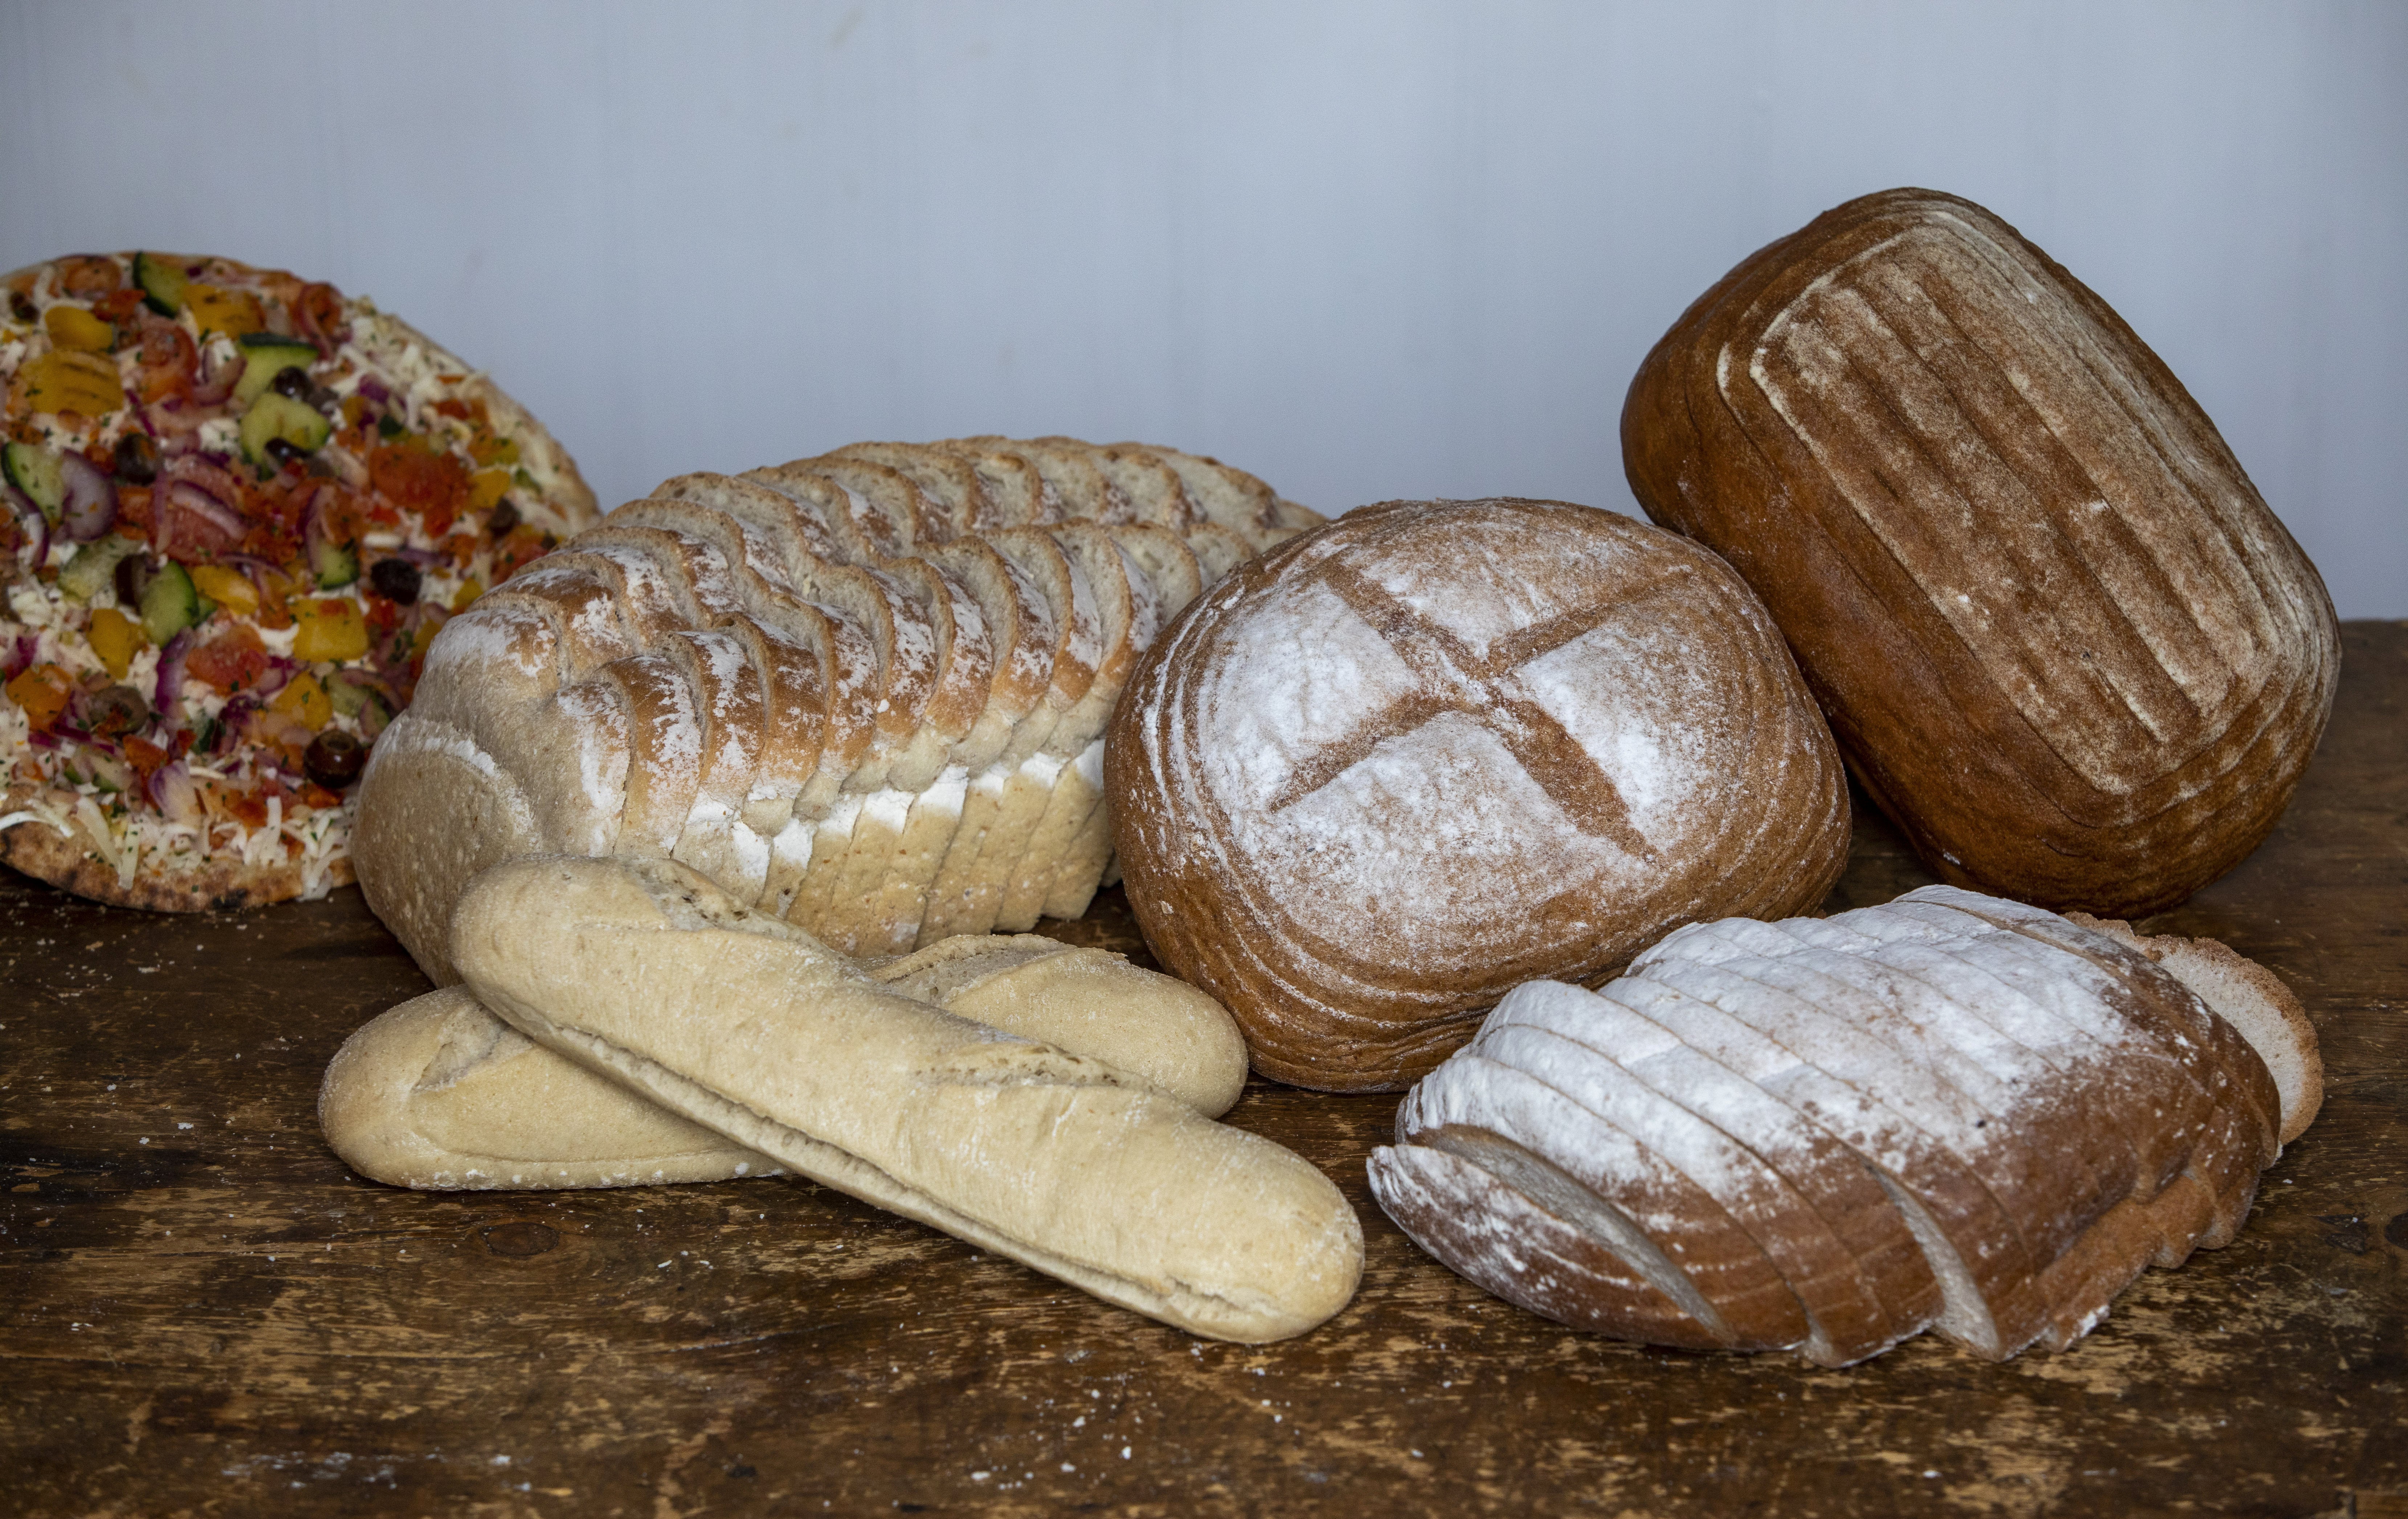 The ‘Real Bread Campaign’ have accused UK retailers of false marketing over sourdough loaves